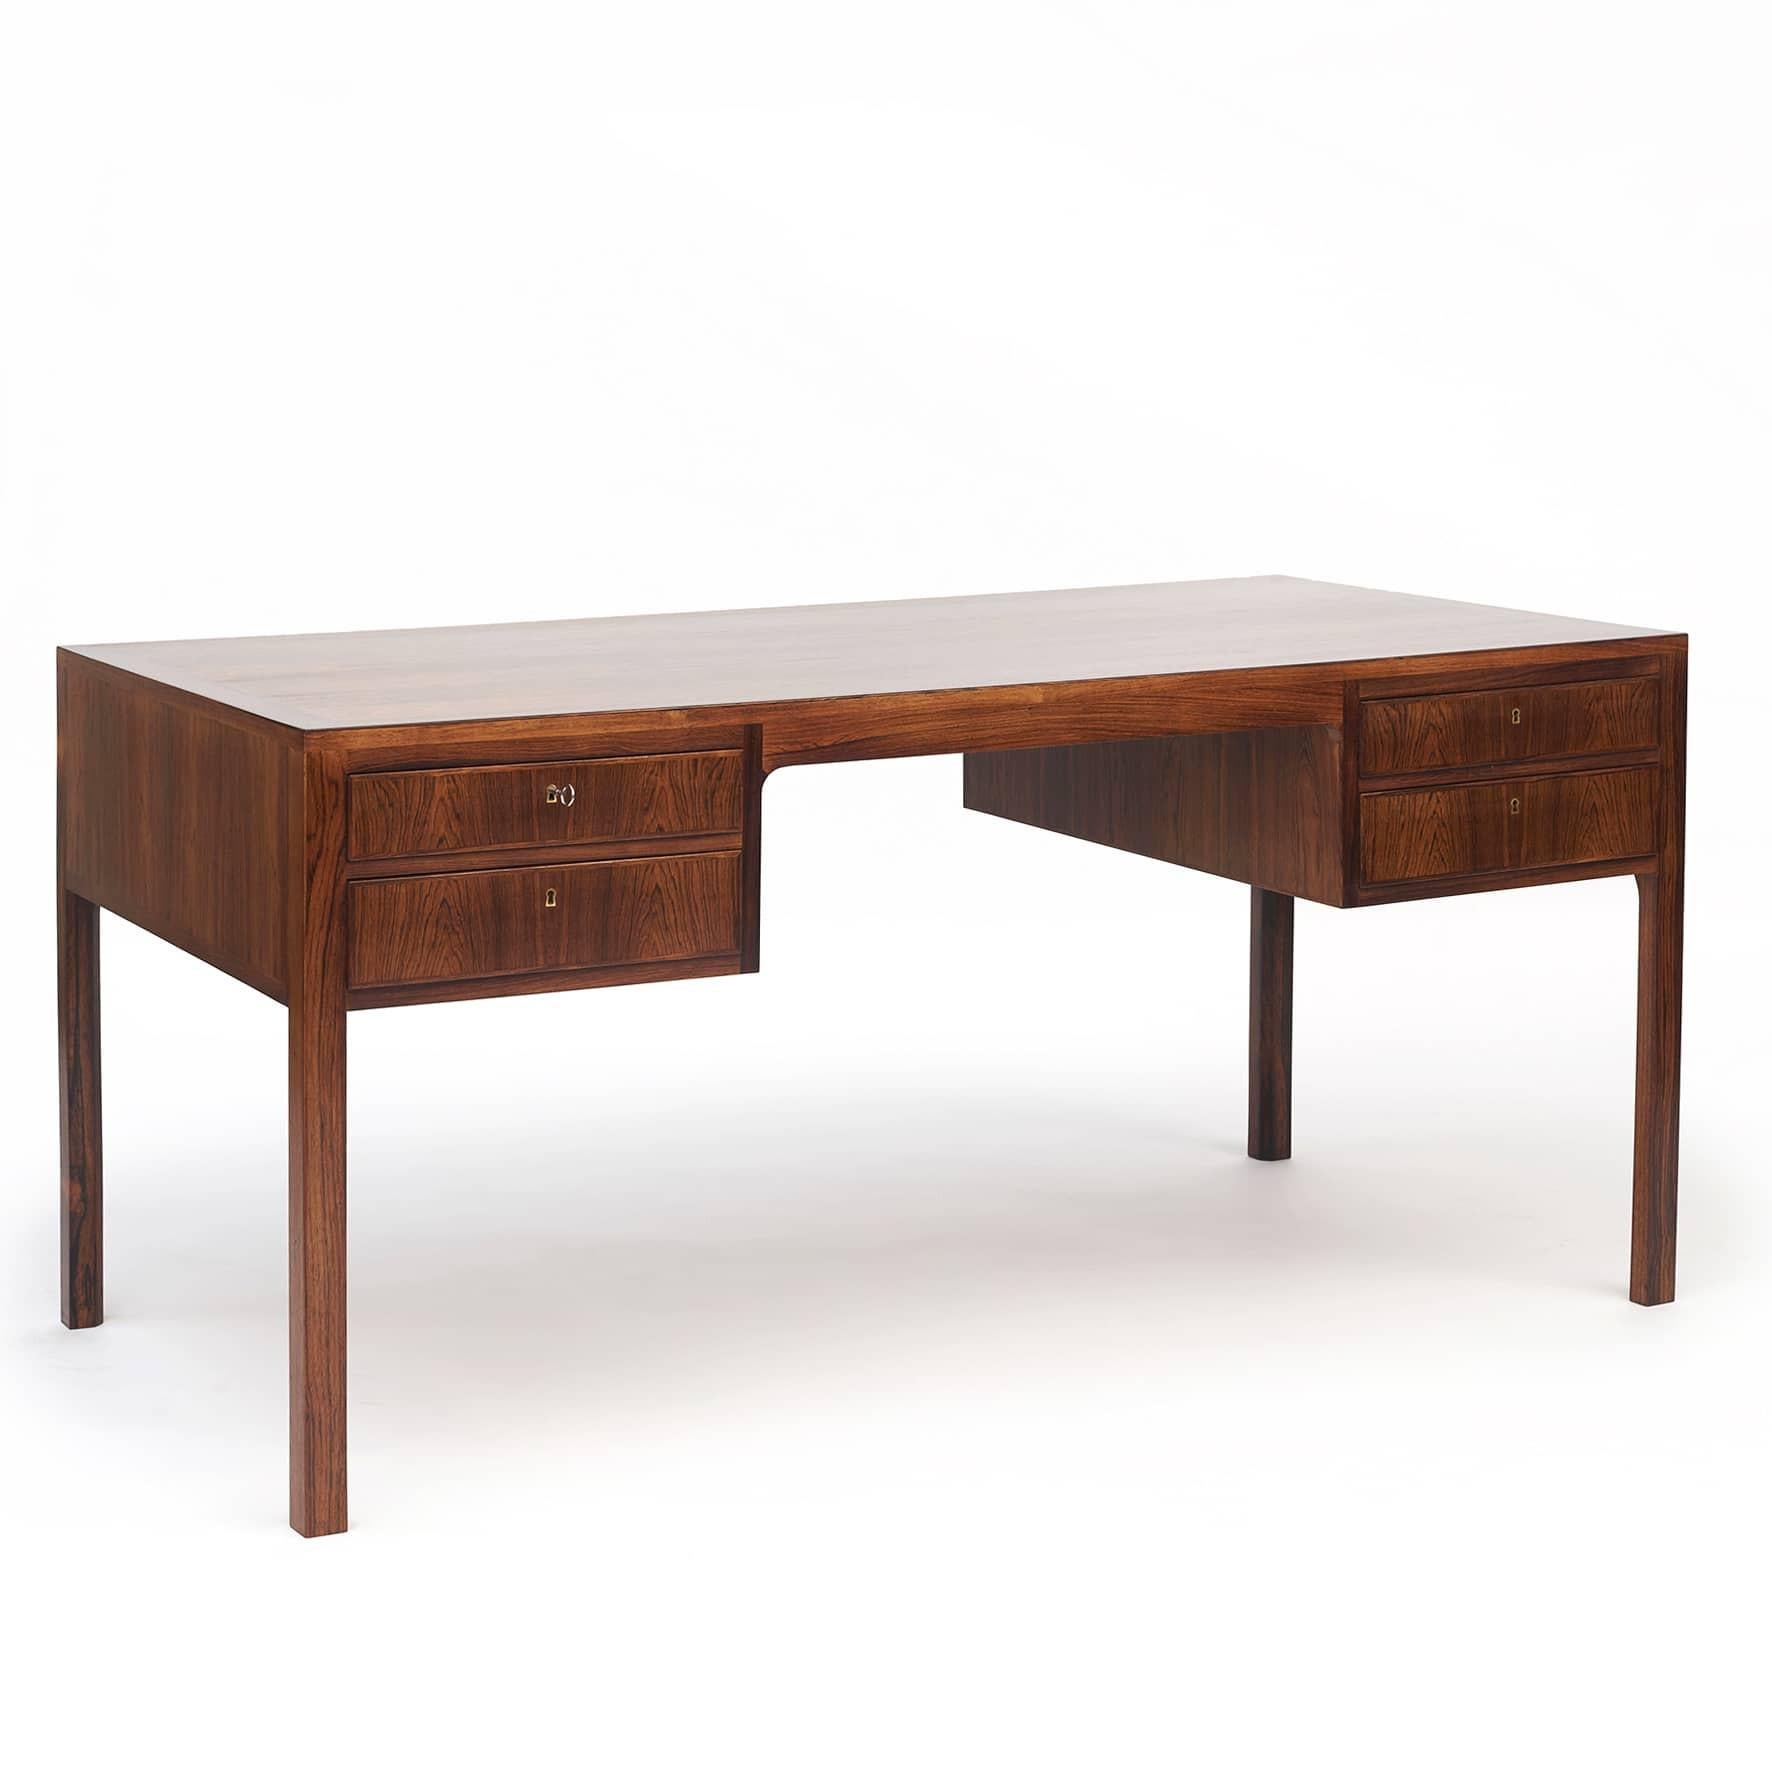 Jacob Kjær 1896-1957.
A freestanding Jacob Kjær Walnut desk.
Front features four drawers.
An elegant and beautiful desk with fine details. The build quality and materials are of the highest quality. The attention to detail is reflected in the